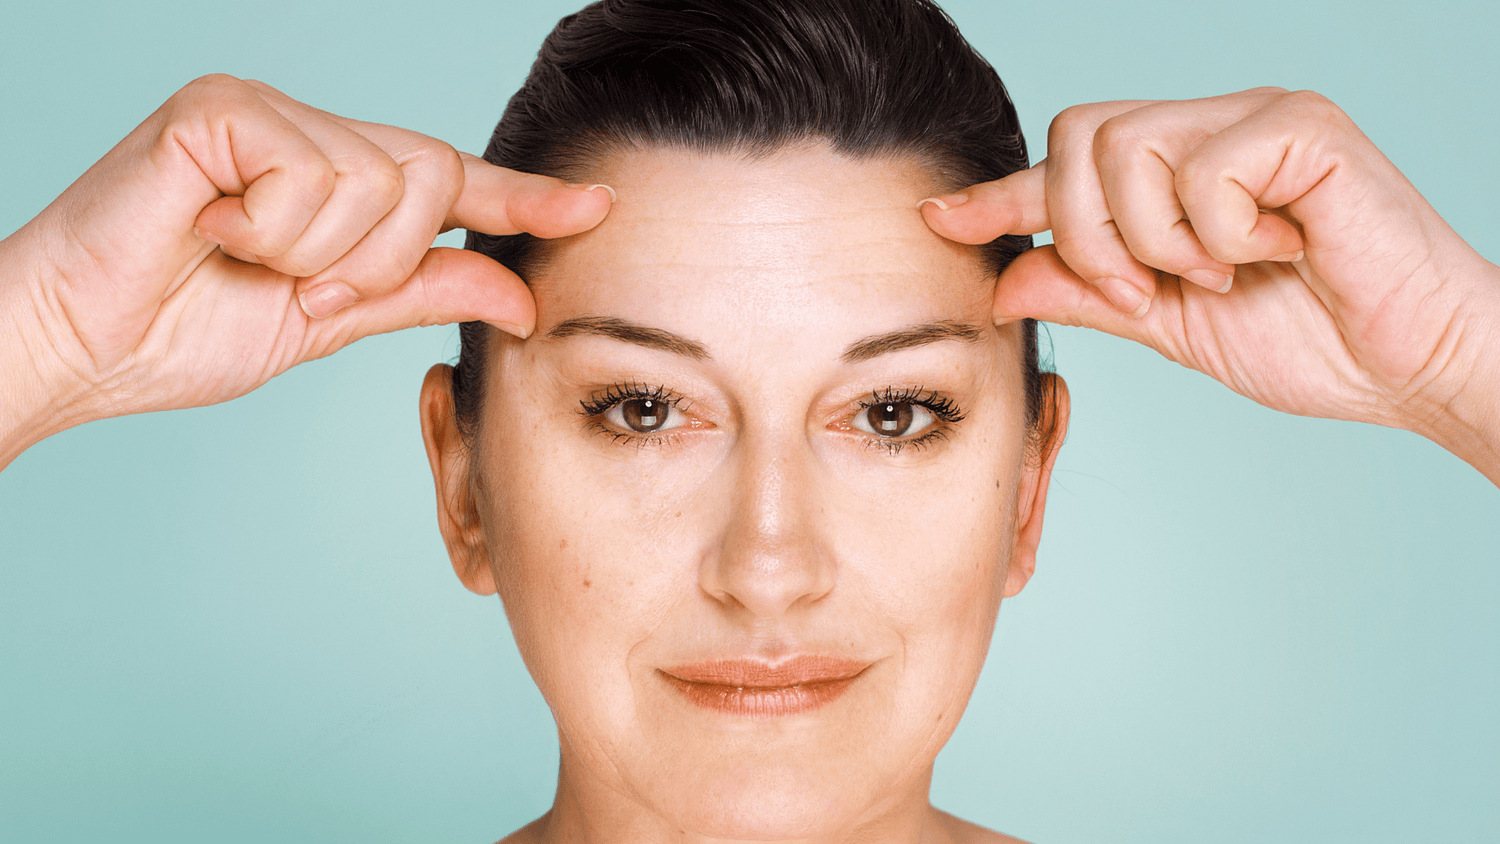 How to Get Rid of Wrinkles: Tips From Dermatologists